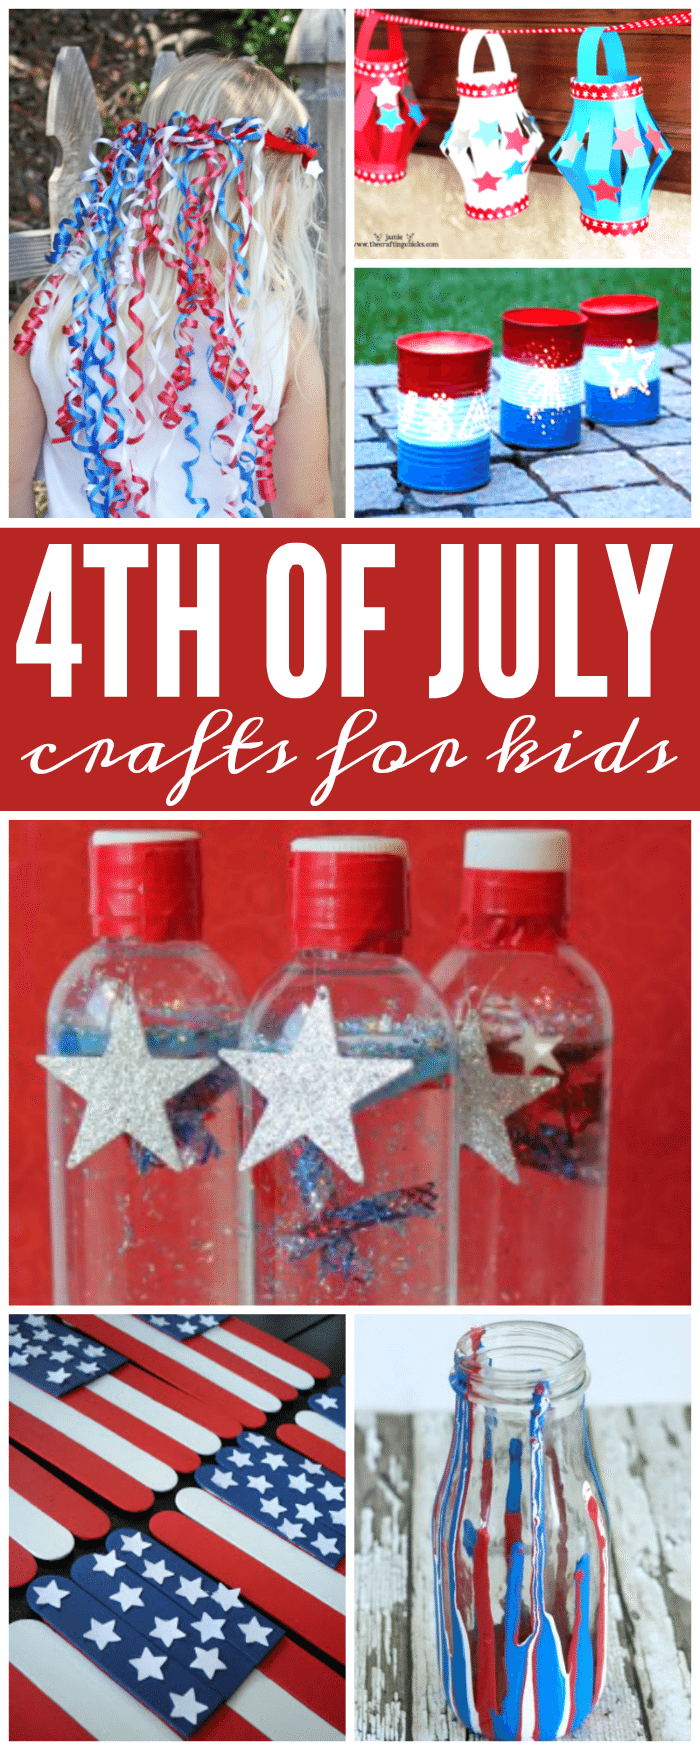 4th of July Crafts for Kids | Memorial Day & Labor Day